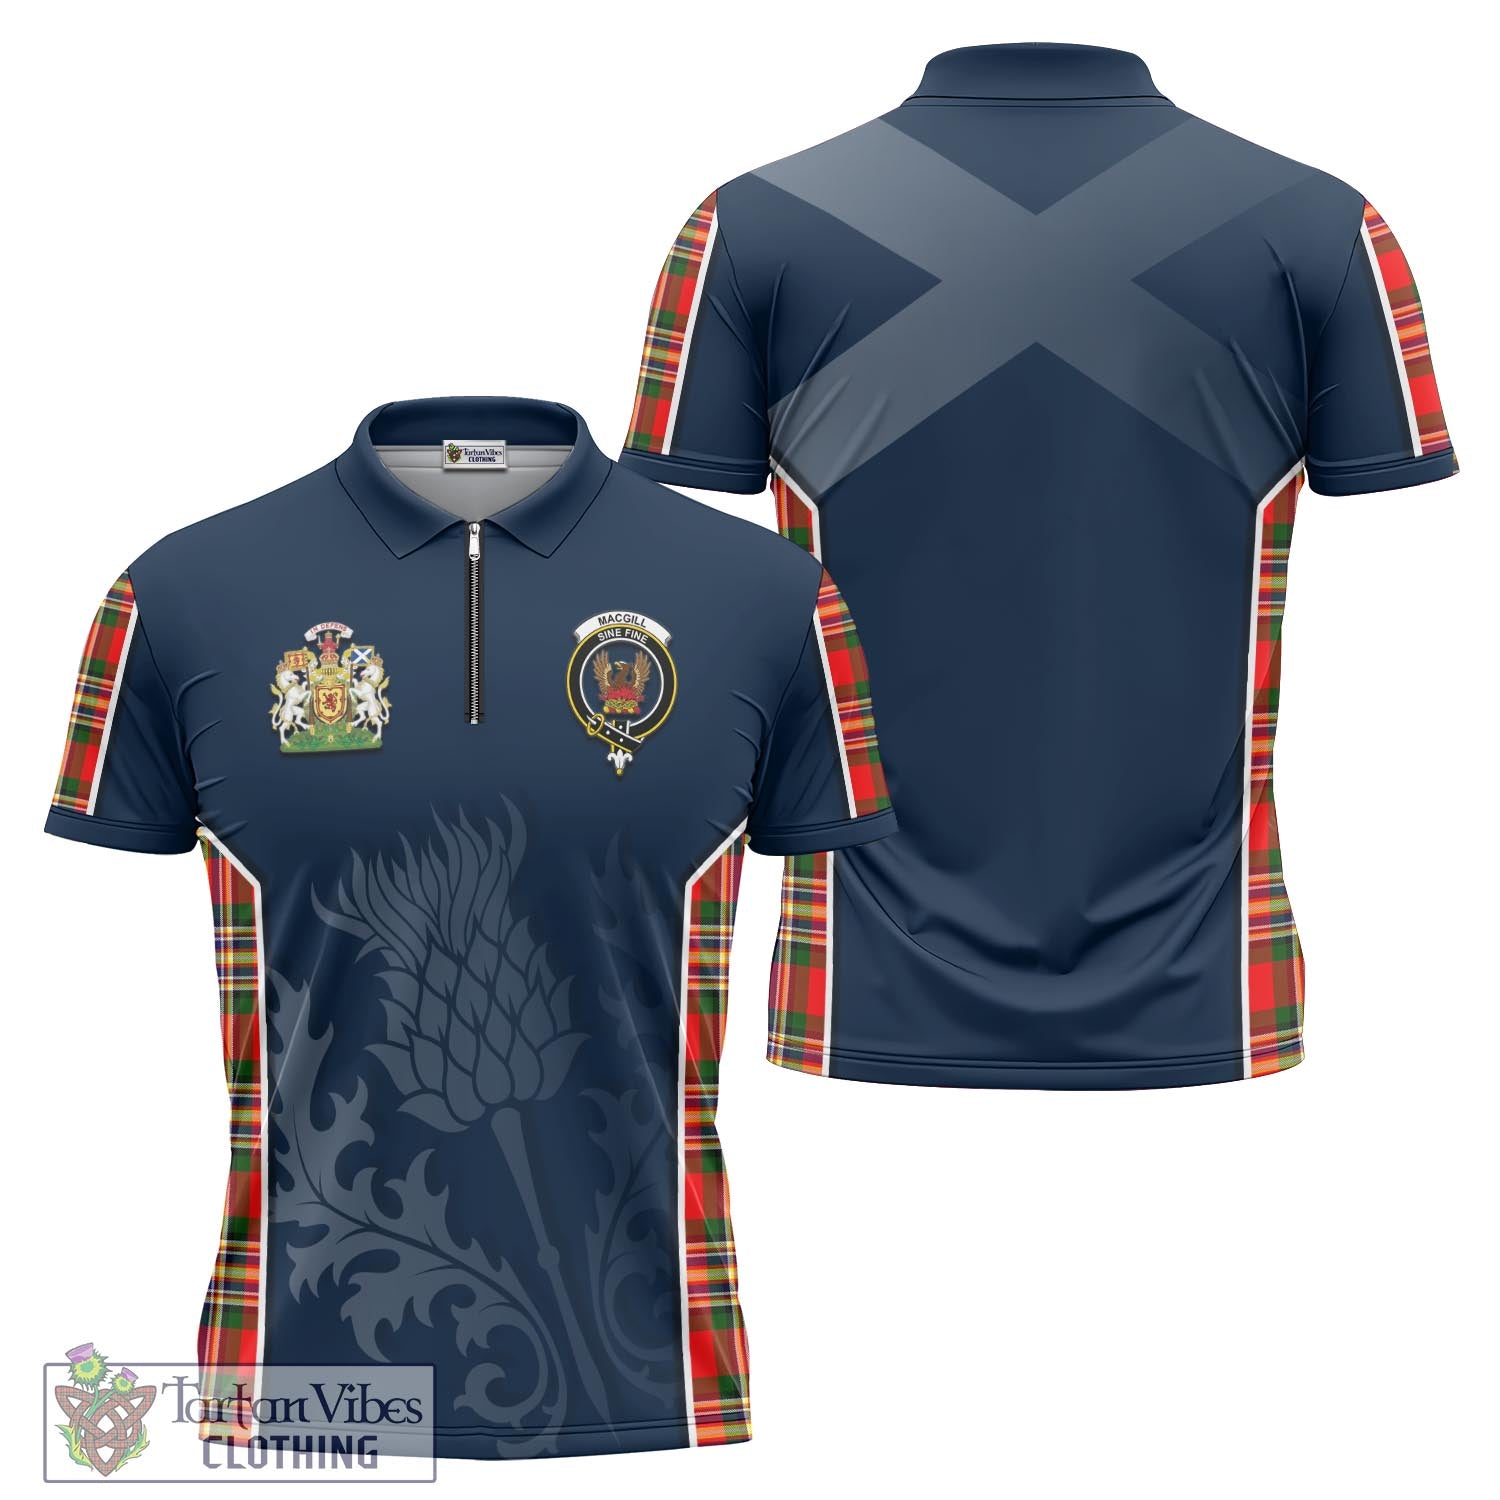 Tartan Vibes Clothing MacGill Modern Tartan Zipper Polo Shirt with Family Crest and Scottish Thistle Vibes Sport Style